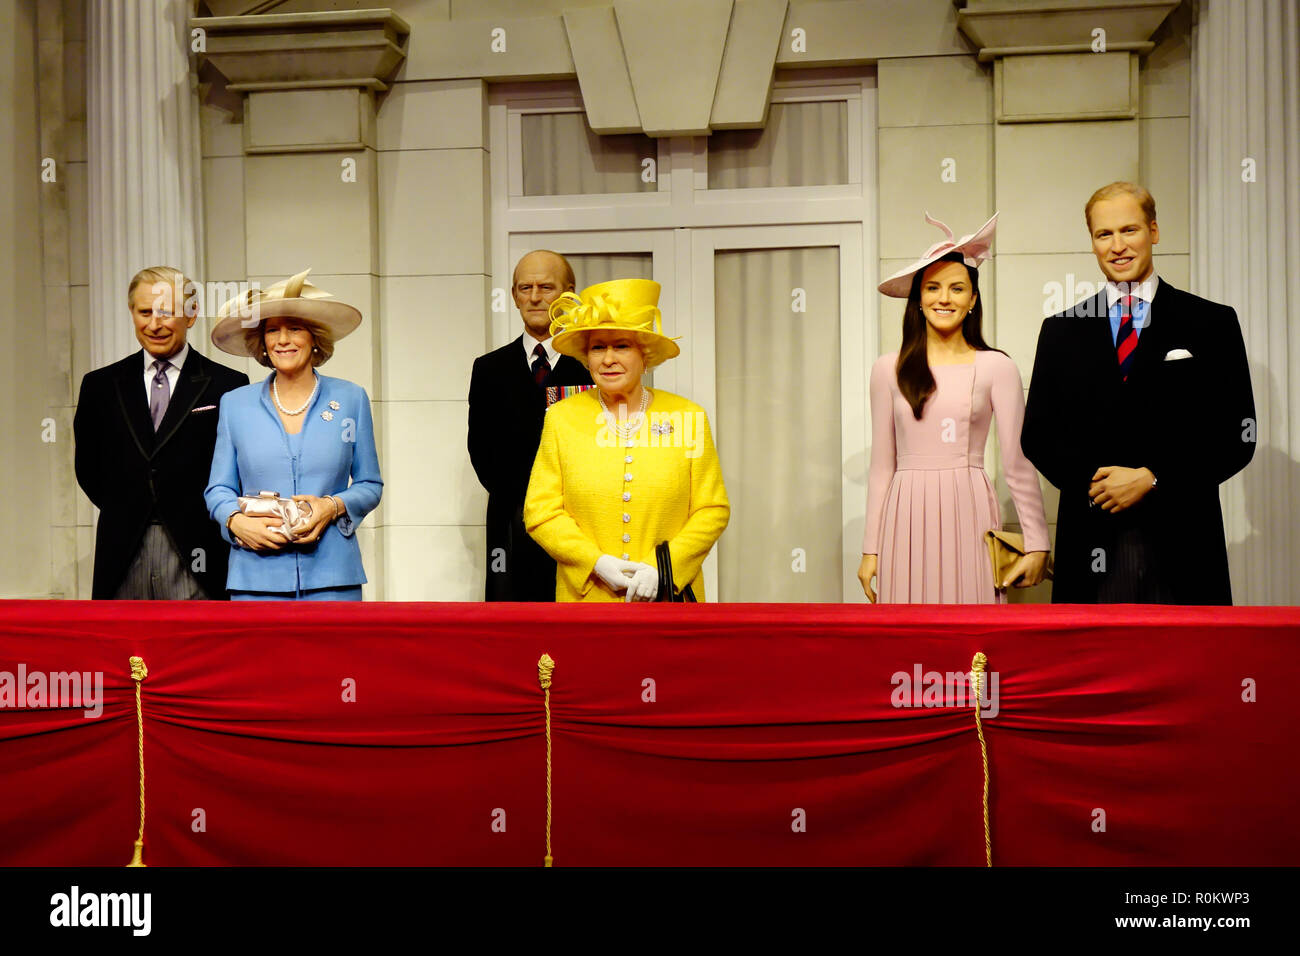 Wax figure of the Royal Family at world renowned tourist attraction Madame Tussauds Wax museum in London, United Kingdom. Stock Photo